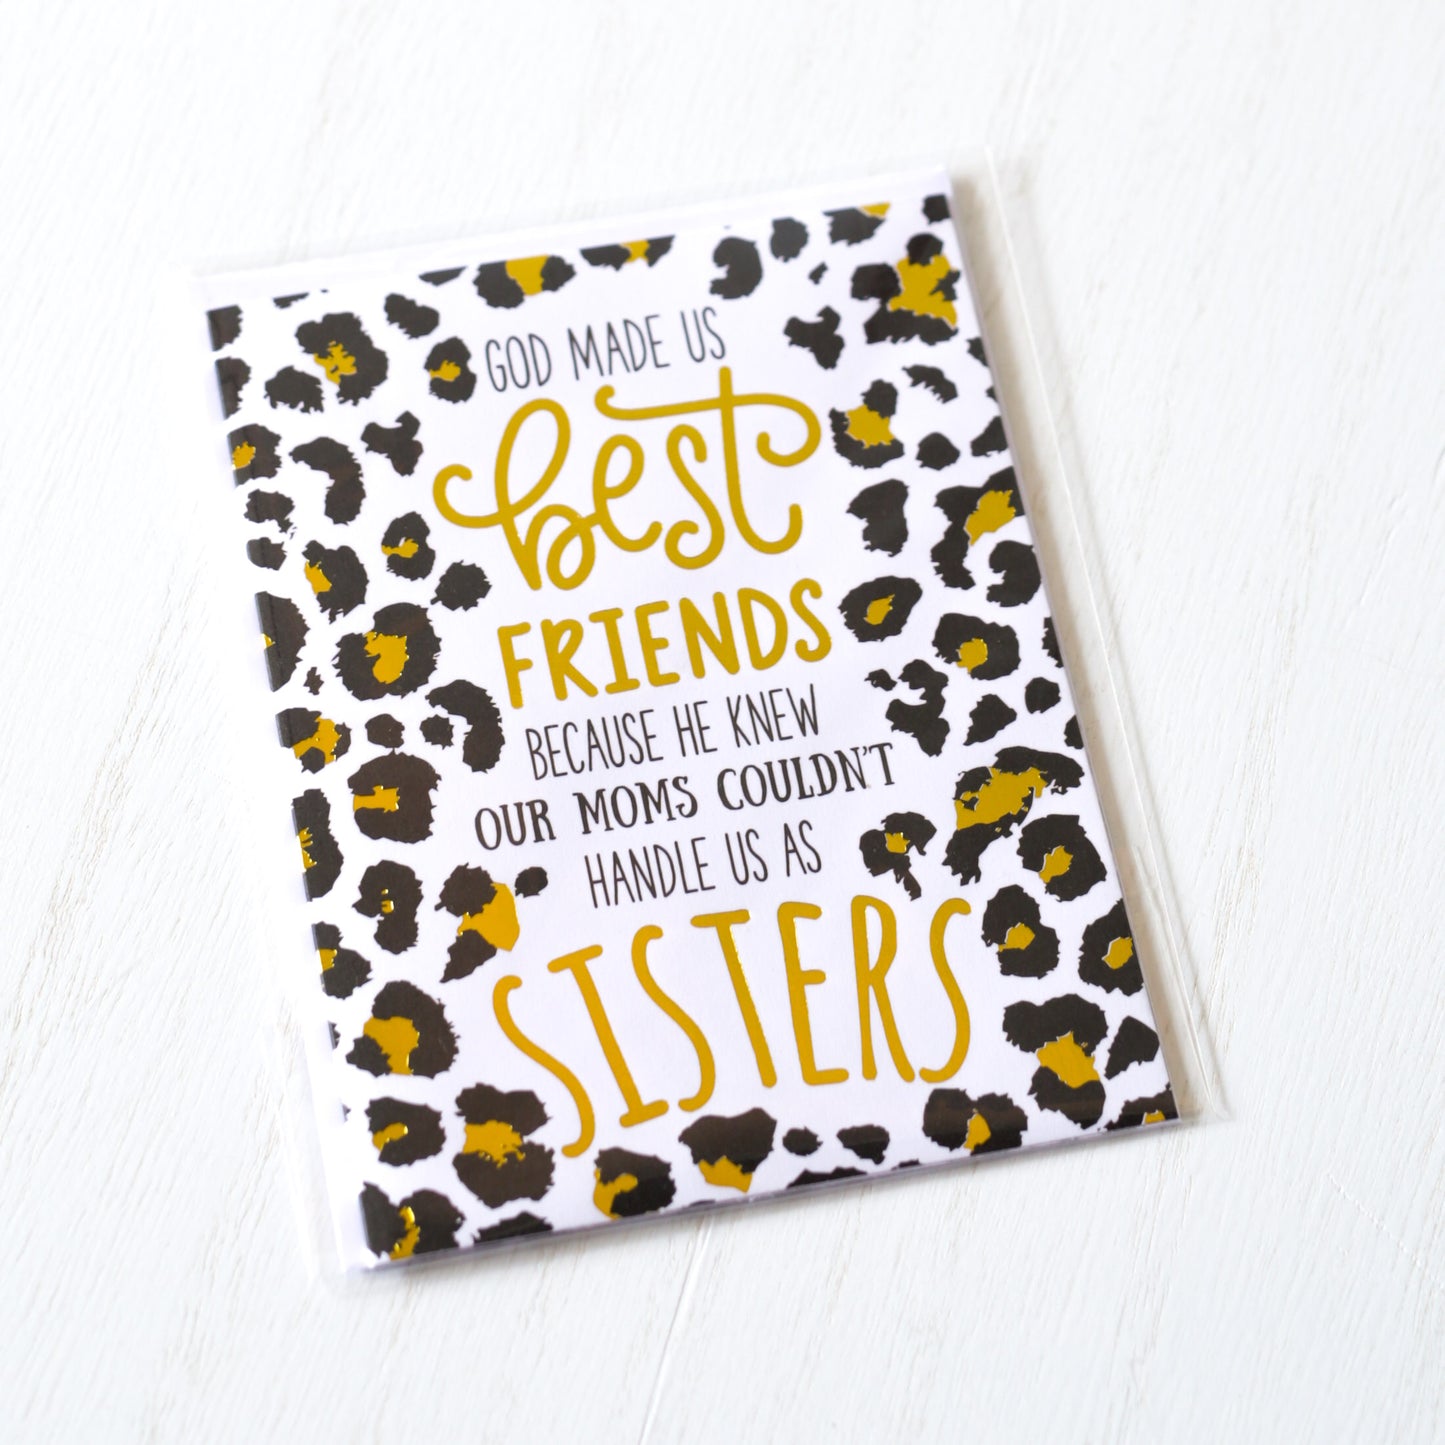 God Made Us Best Friends Greeting Card